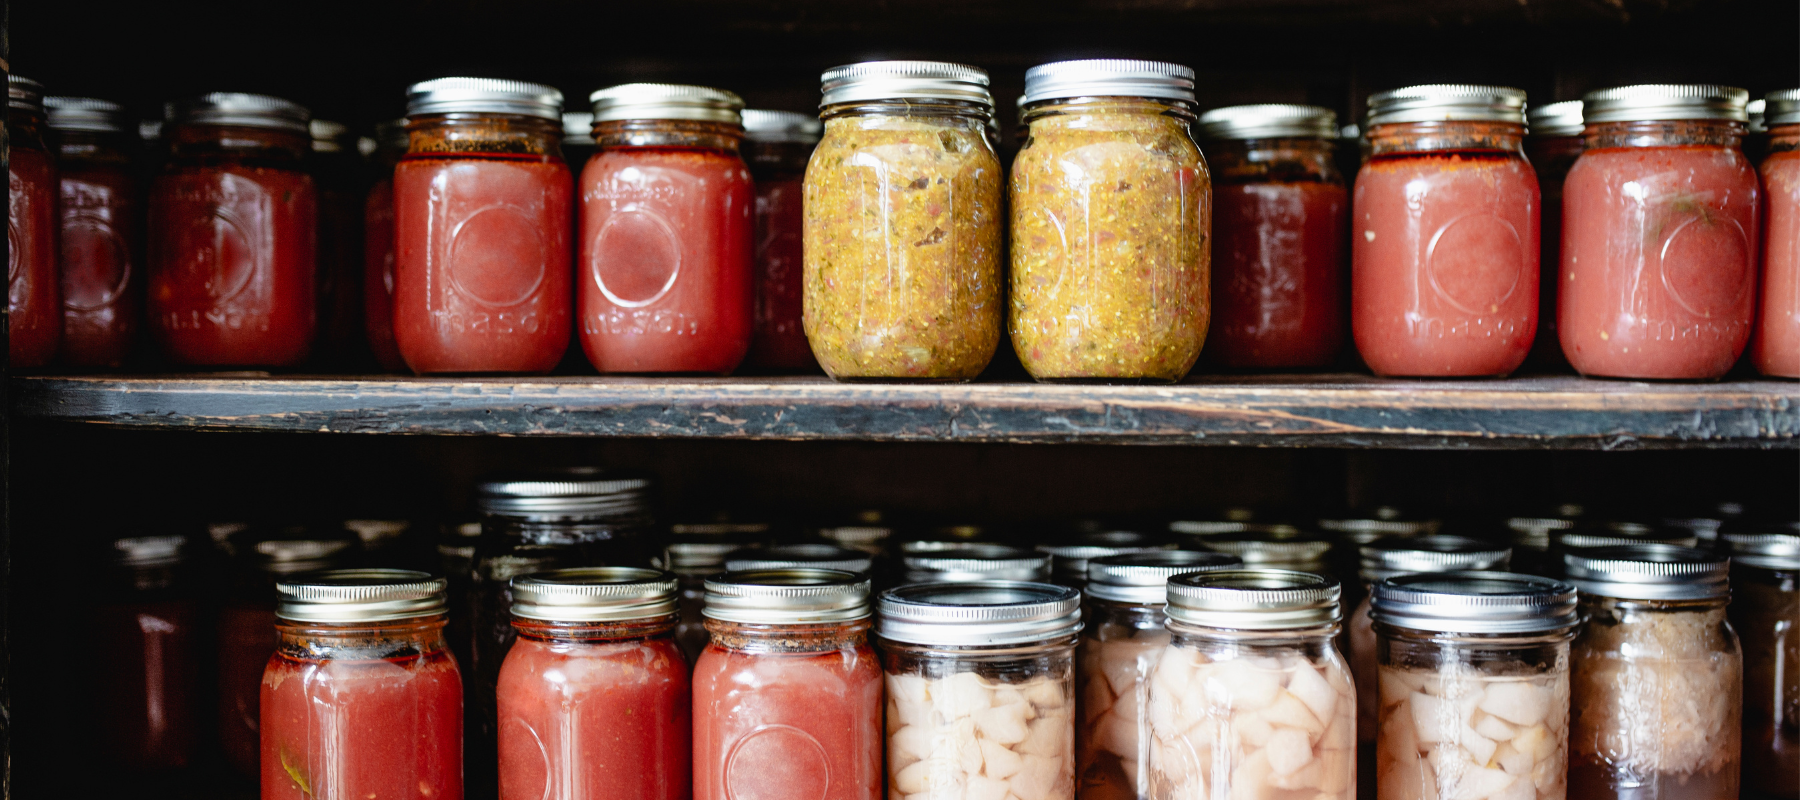 Water Bath Canning vs. Pressure Canning